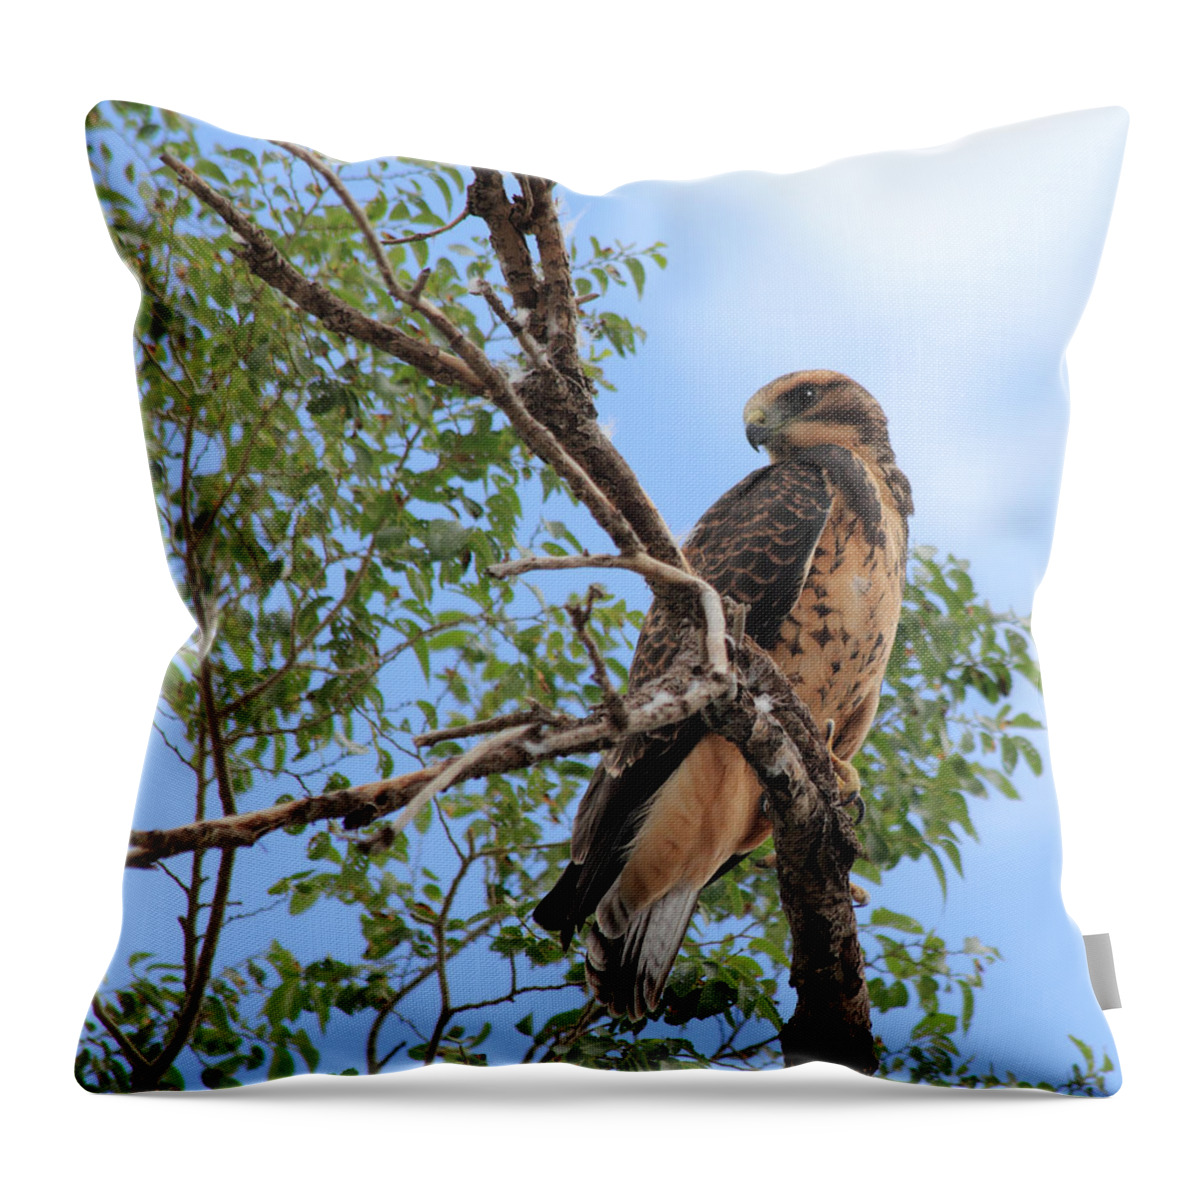 Hawk Throw Pillow featuring the photograph Juvenile Hawk by Shane Bechler